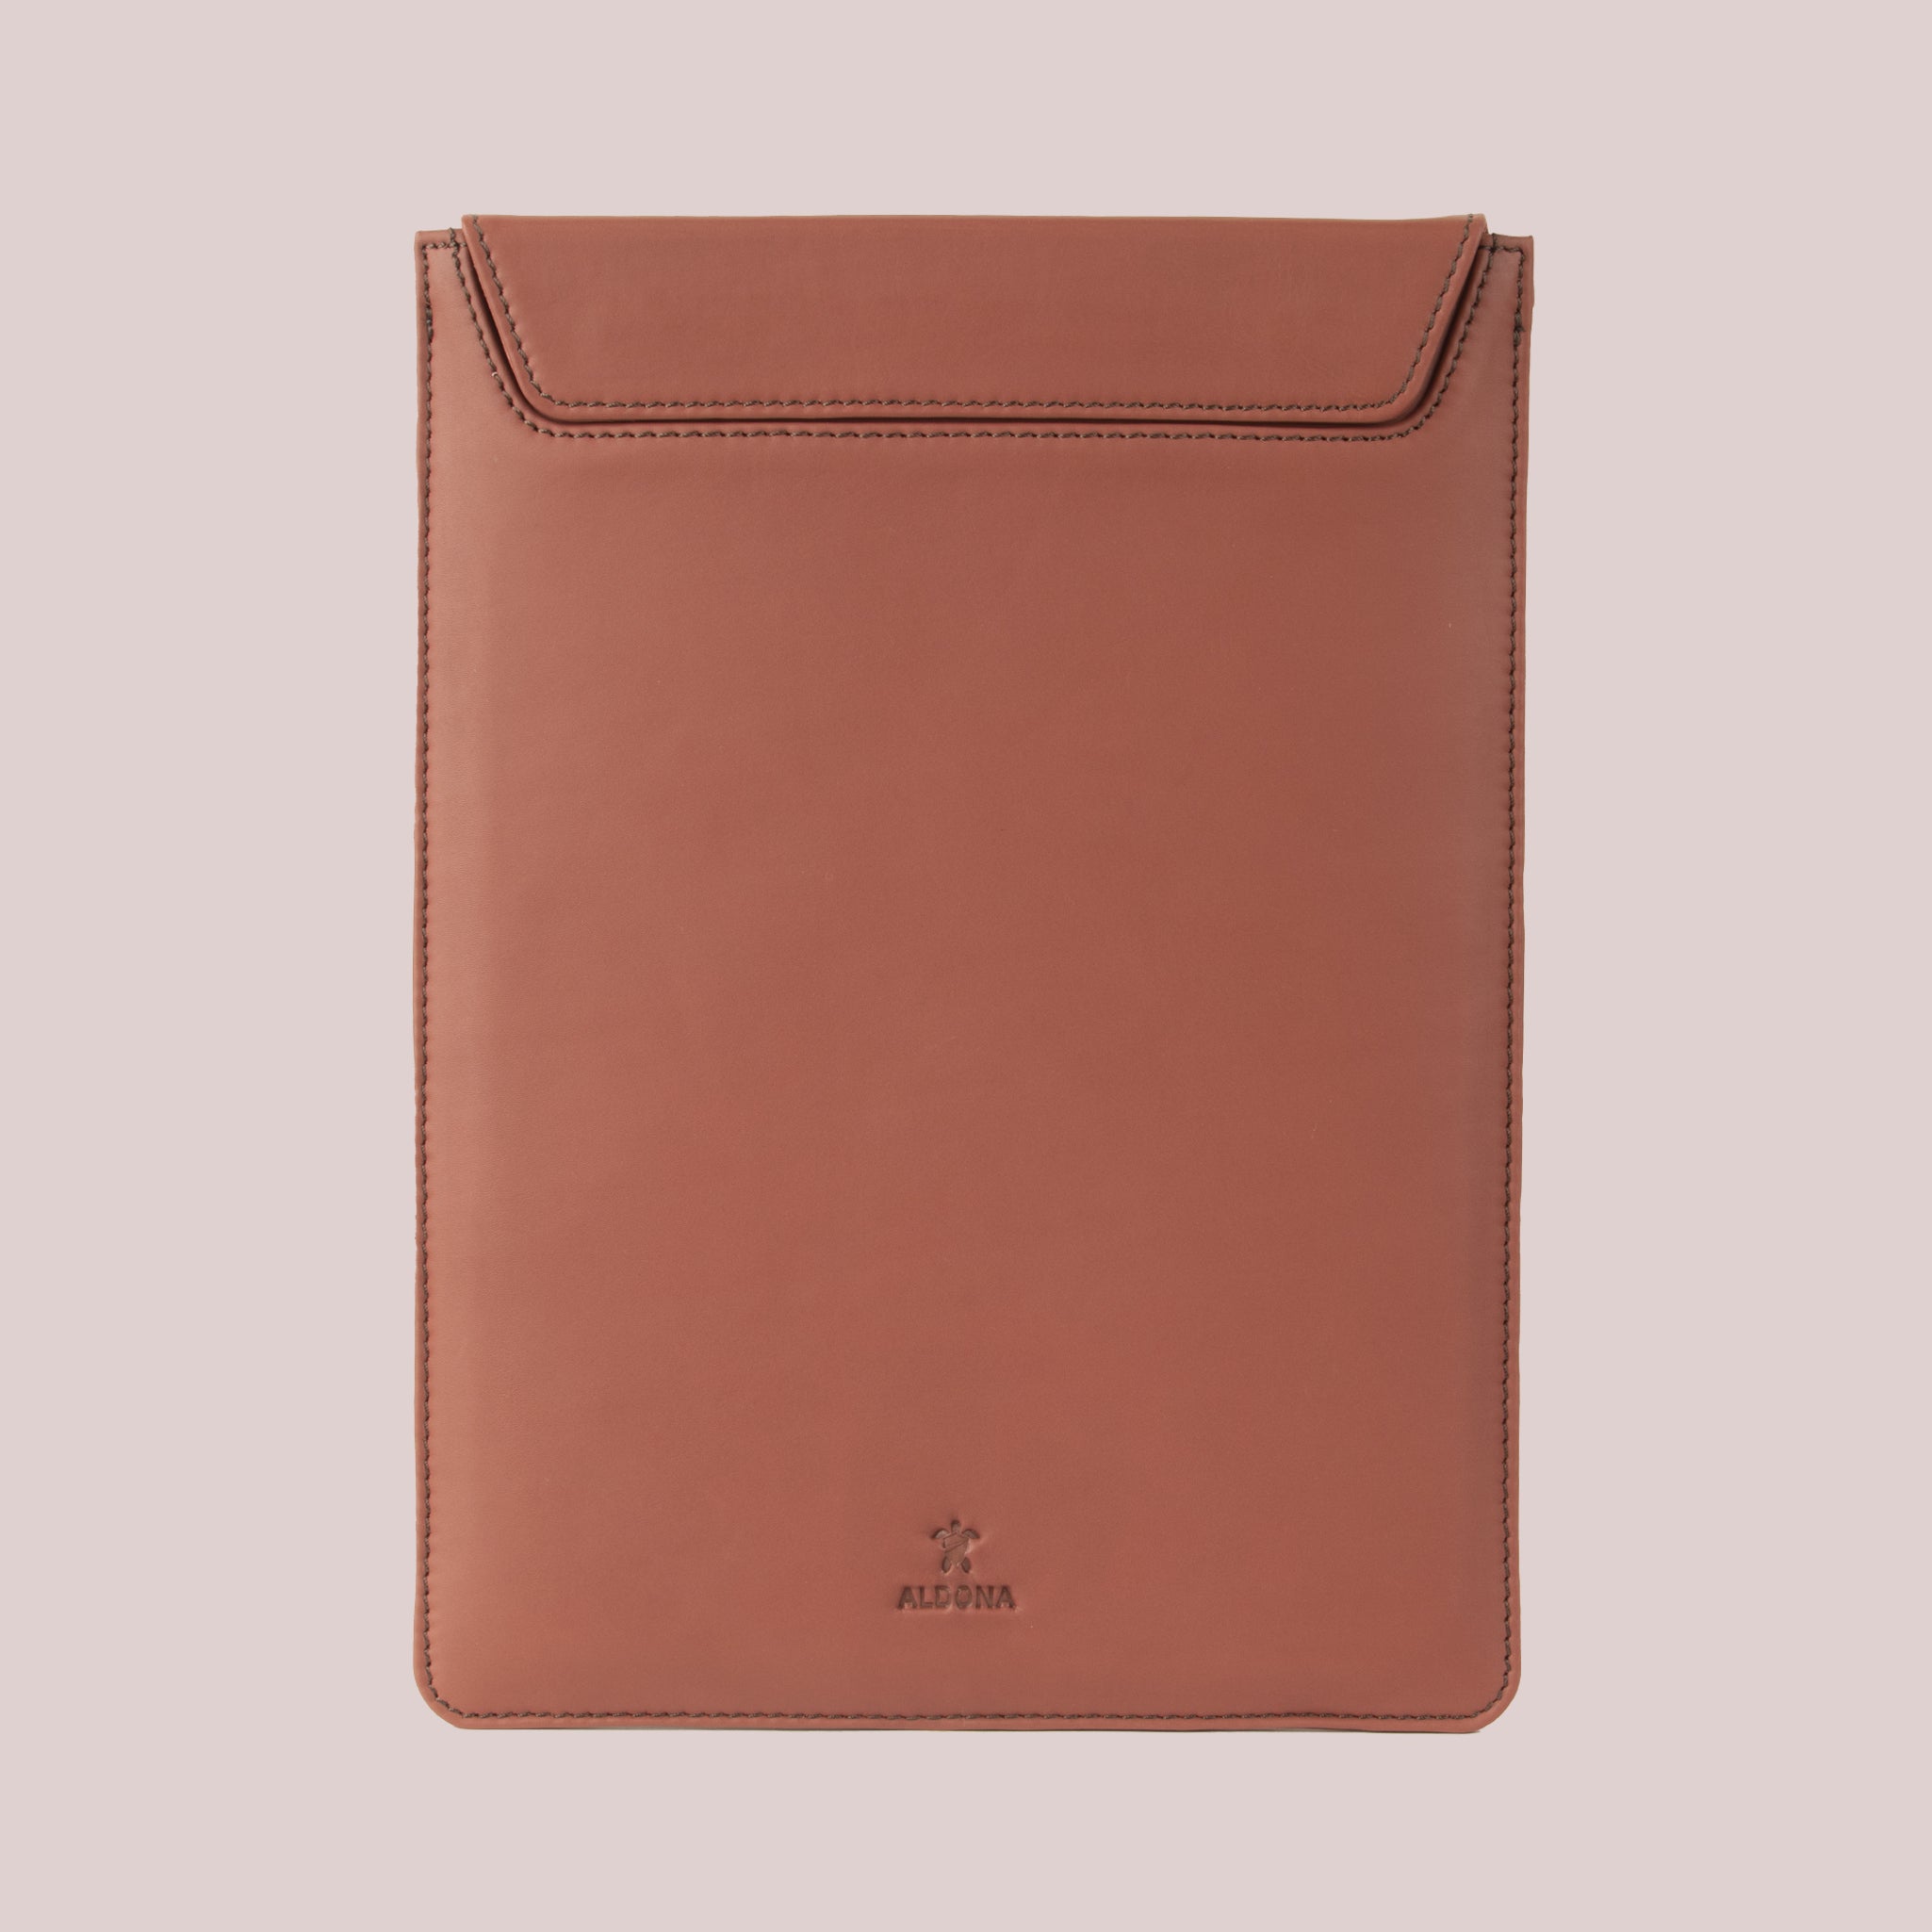 Buy brown leather sleeve for Macbook laptops, with a flap